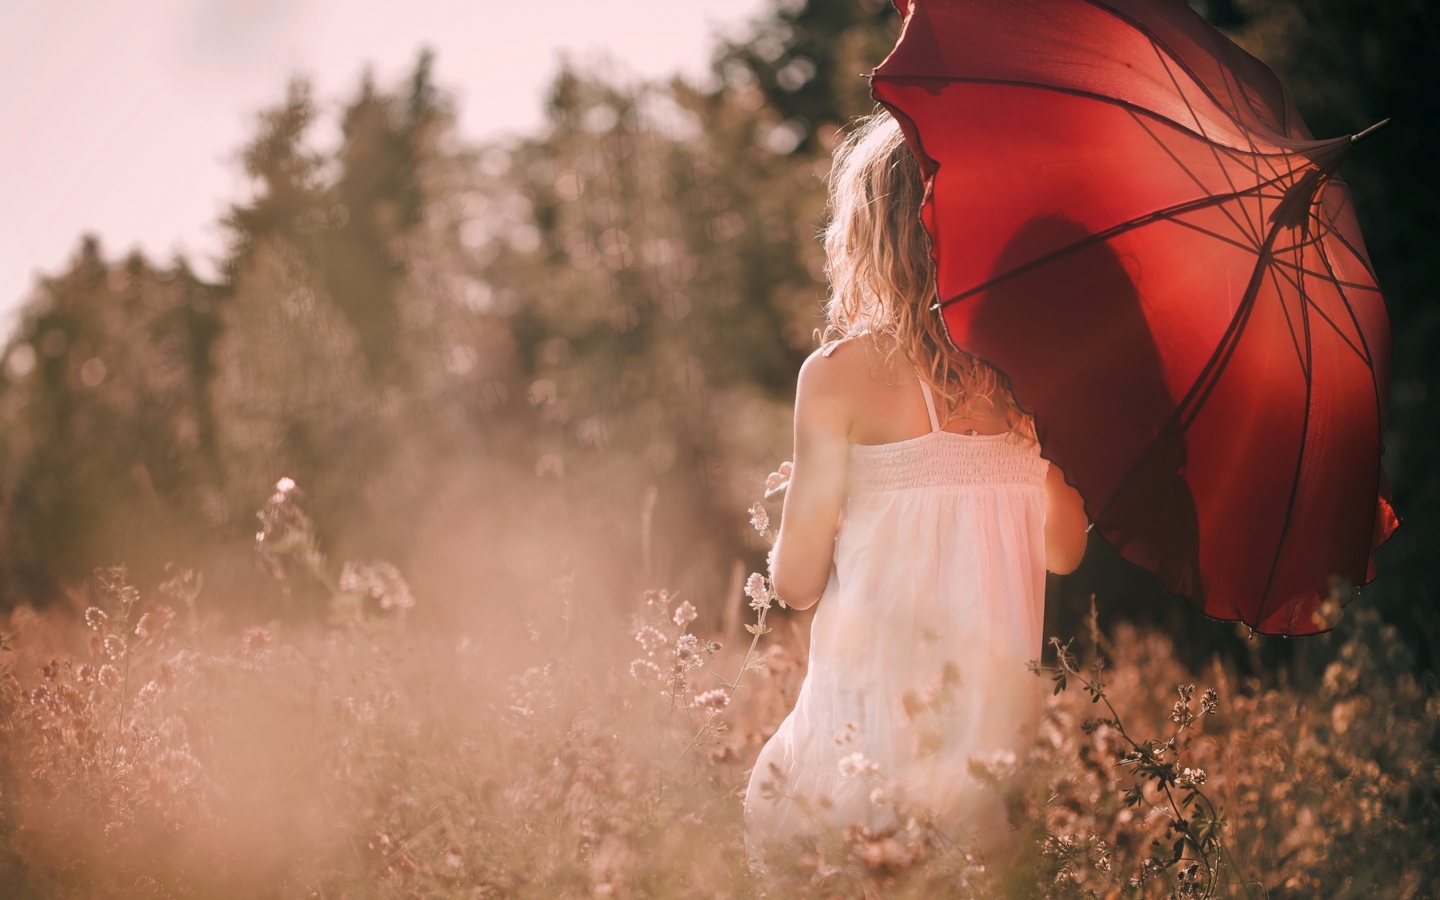 Girl With Red Umbrella wallpaper 1440x900